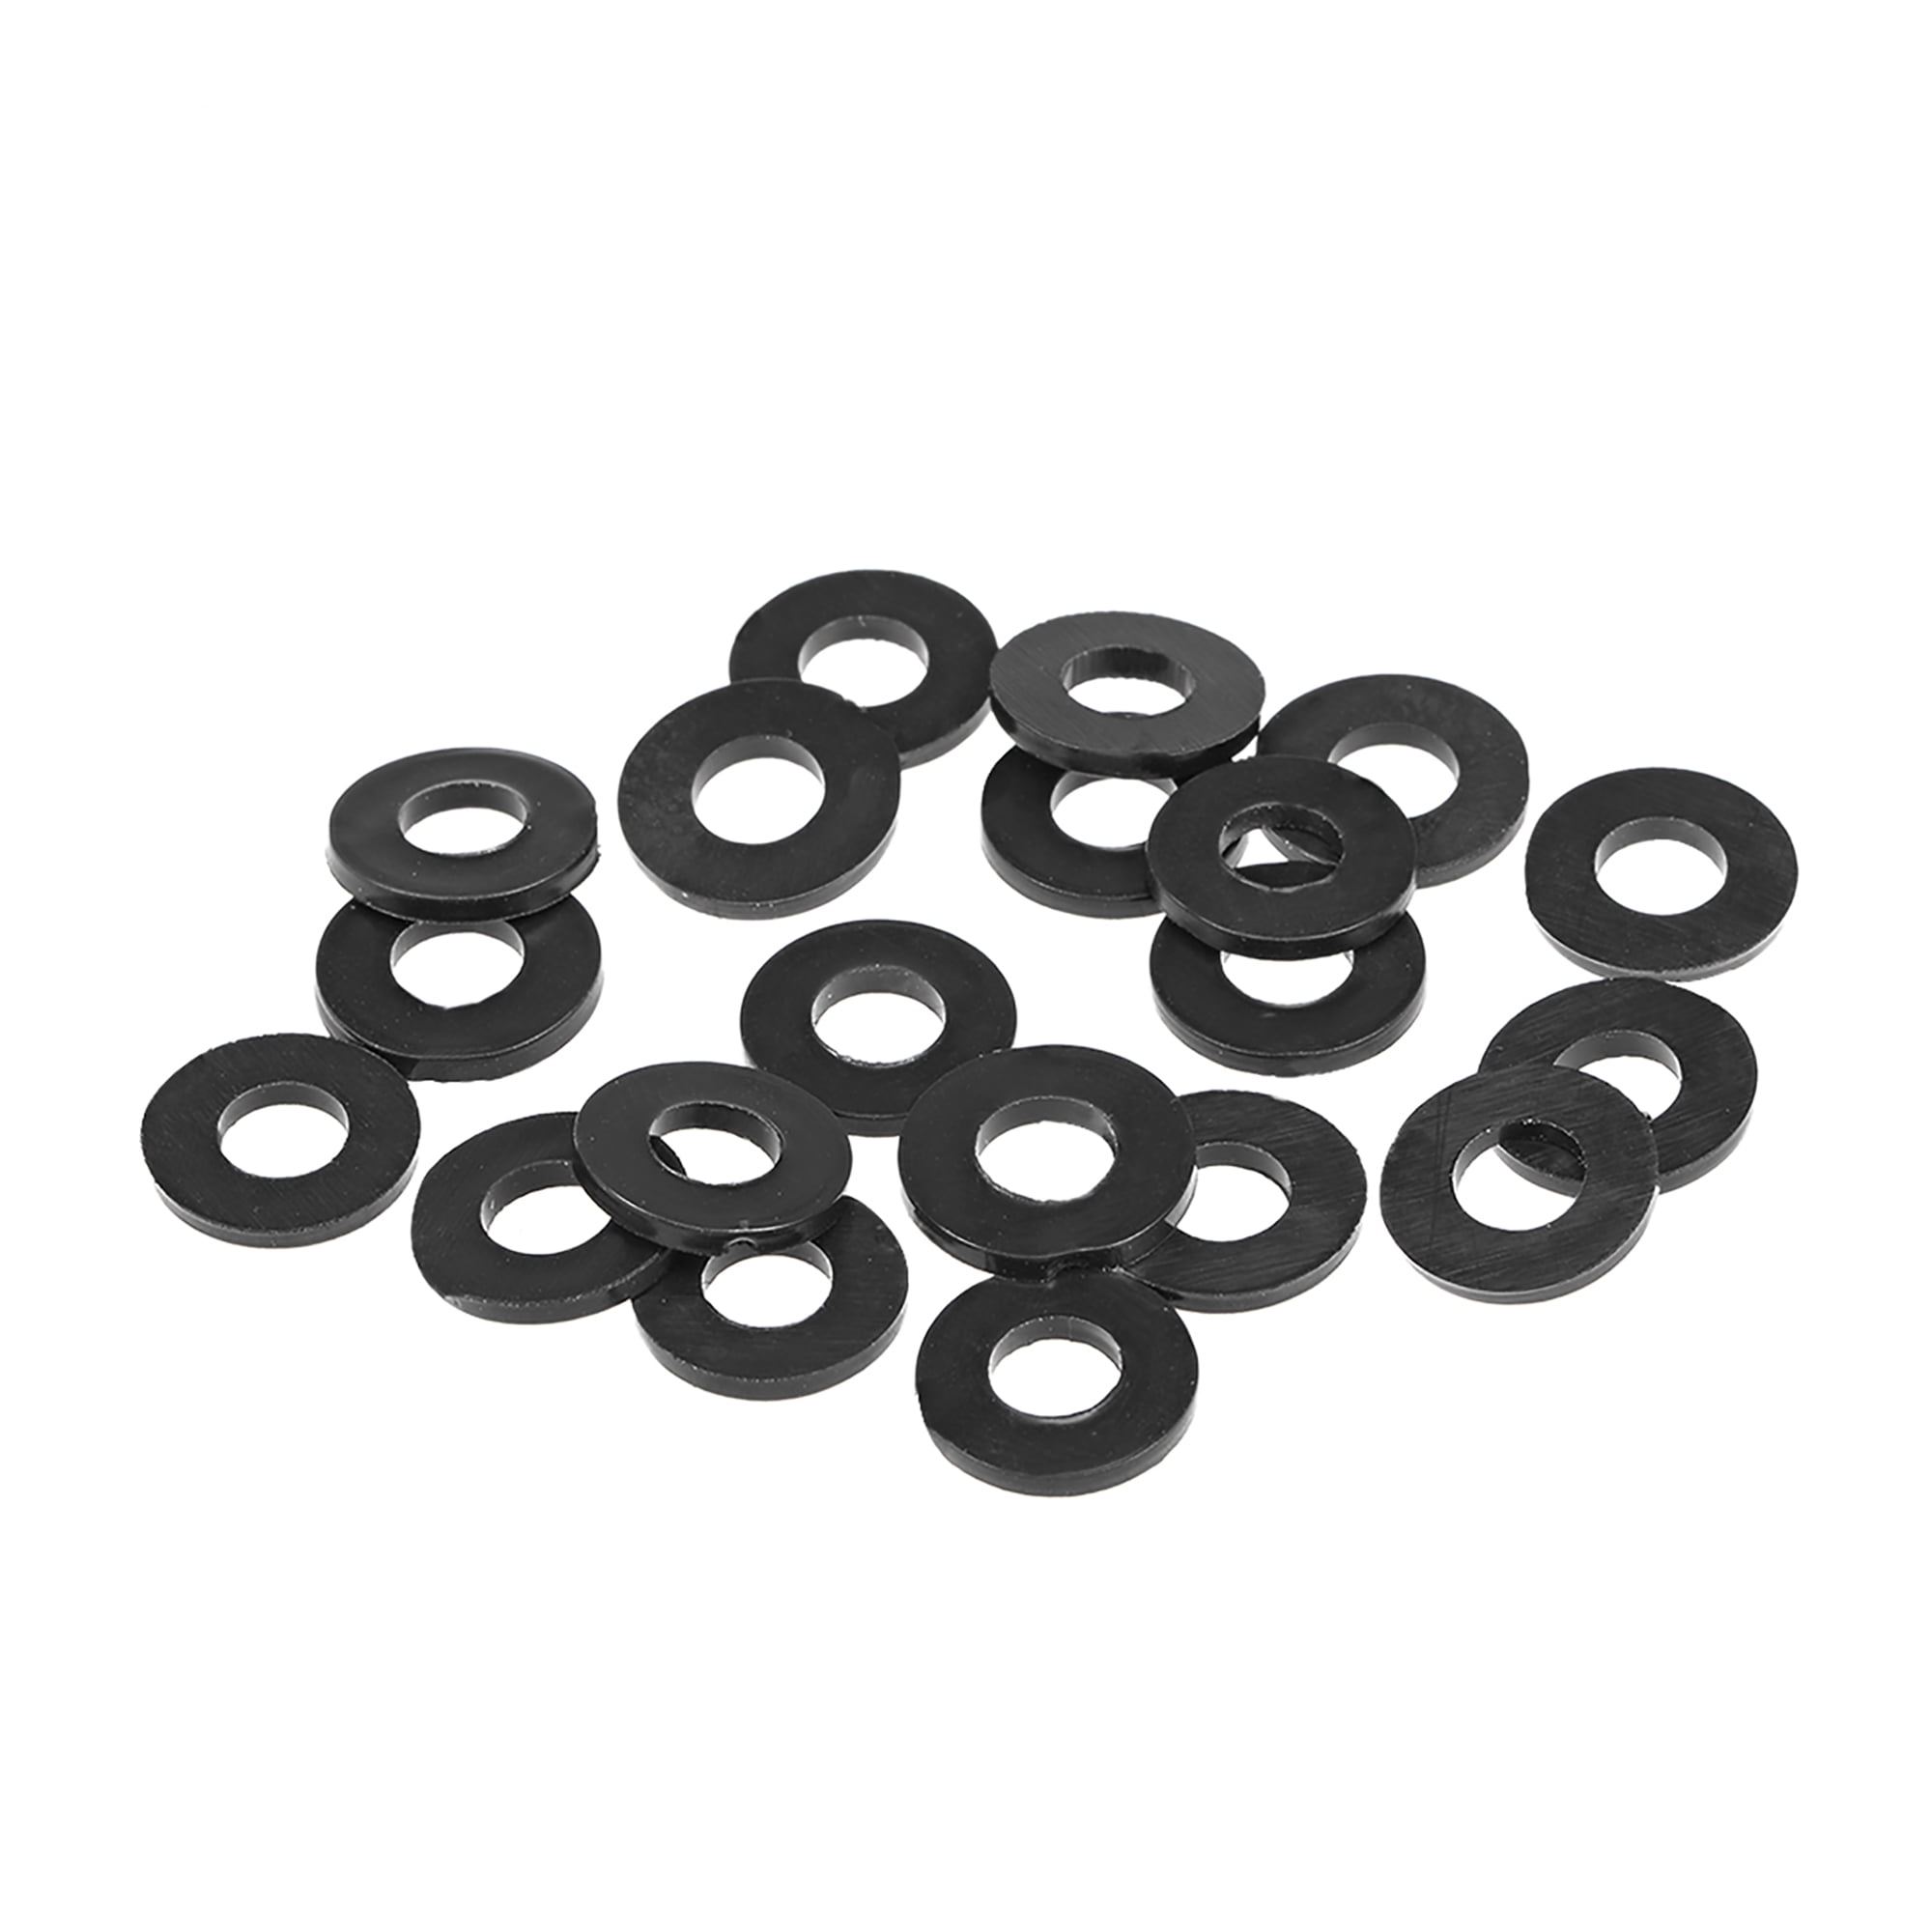 mm 10X Plastic SPACERS M6 Thickness 2MM to 30MM ID 6MM OD 10MM WASHERS Screw Tube = 10 Thickness L